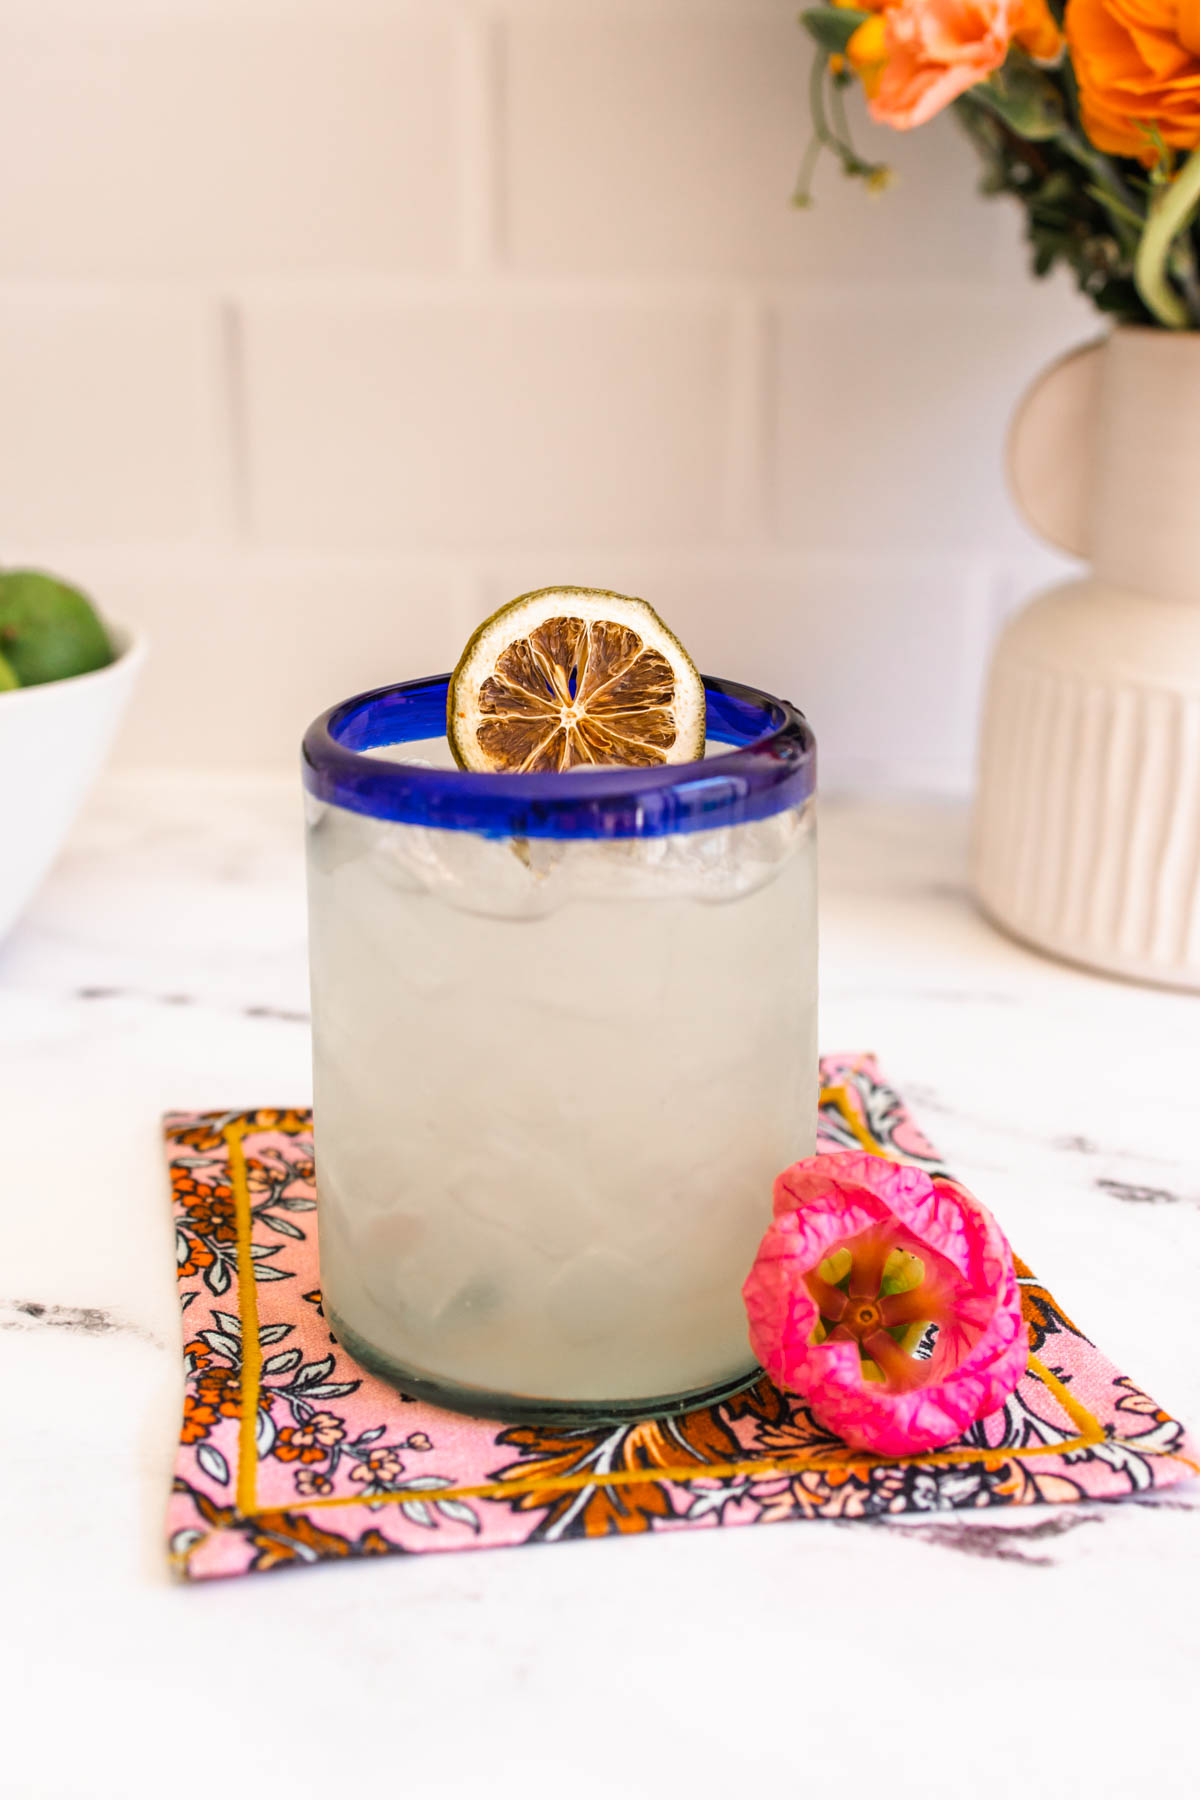 A blue-rimmed glass of Seedlip Margarita garnished with a dehydrated lime wheel on top with a pink flower below the glass.